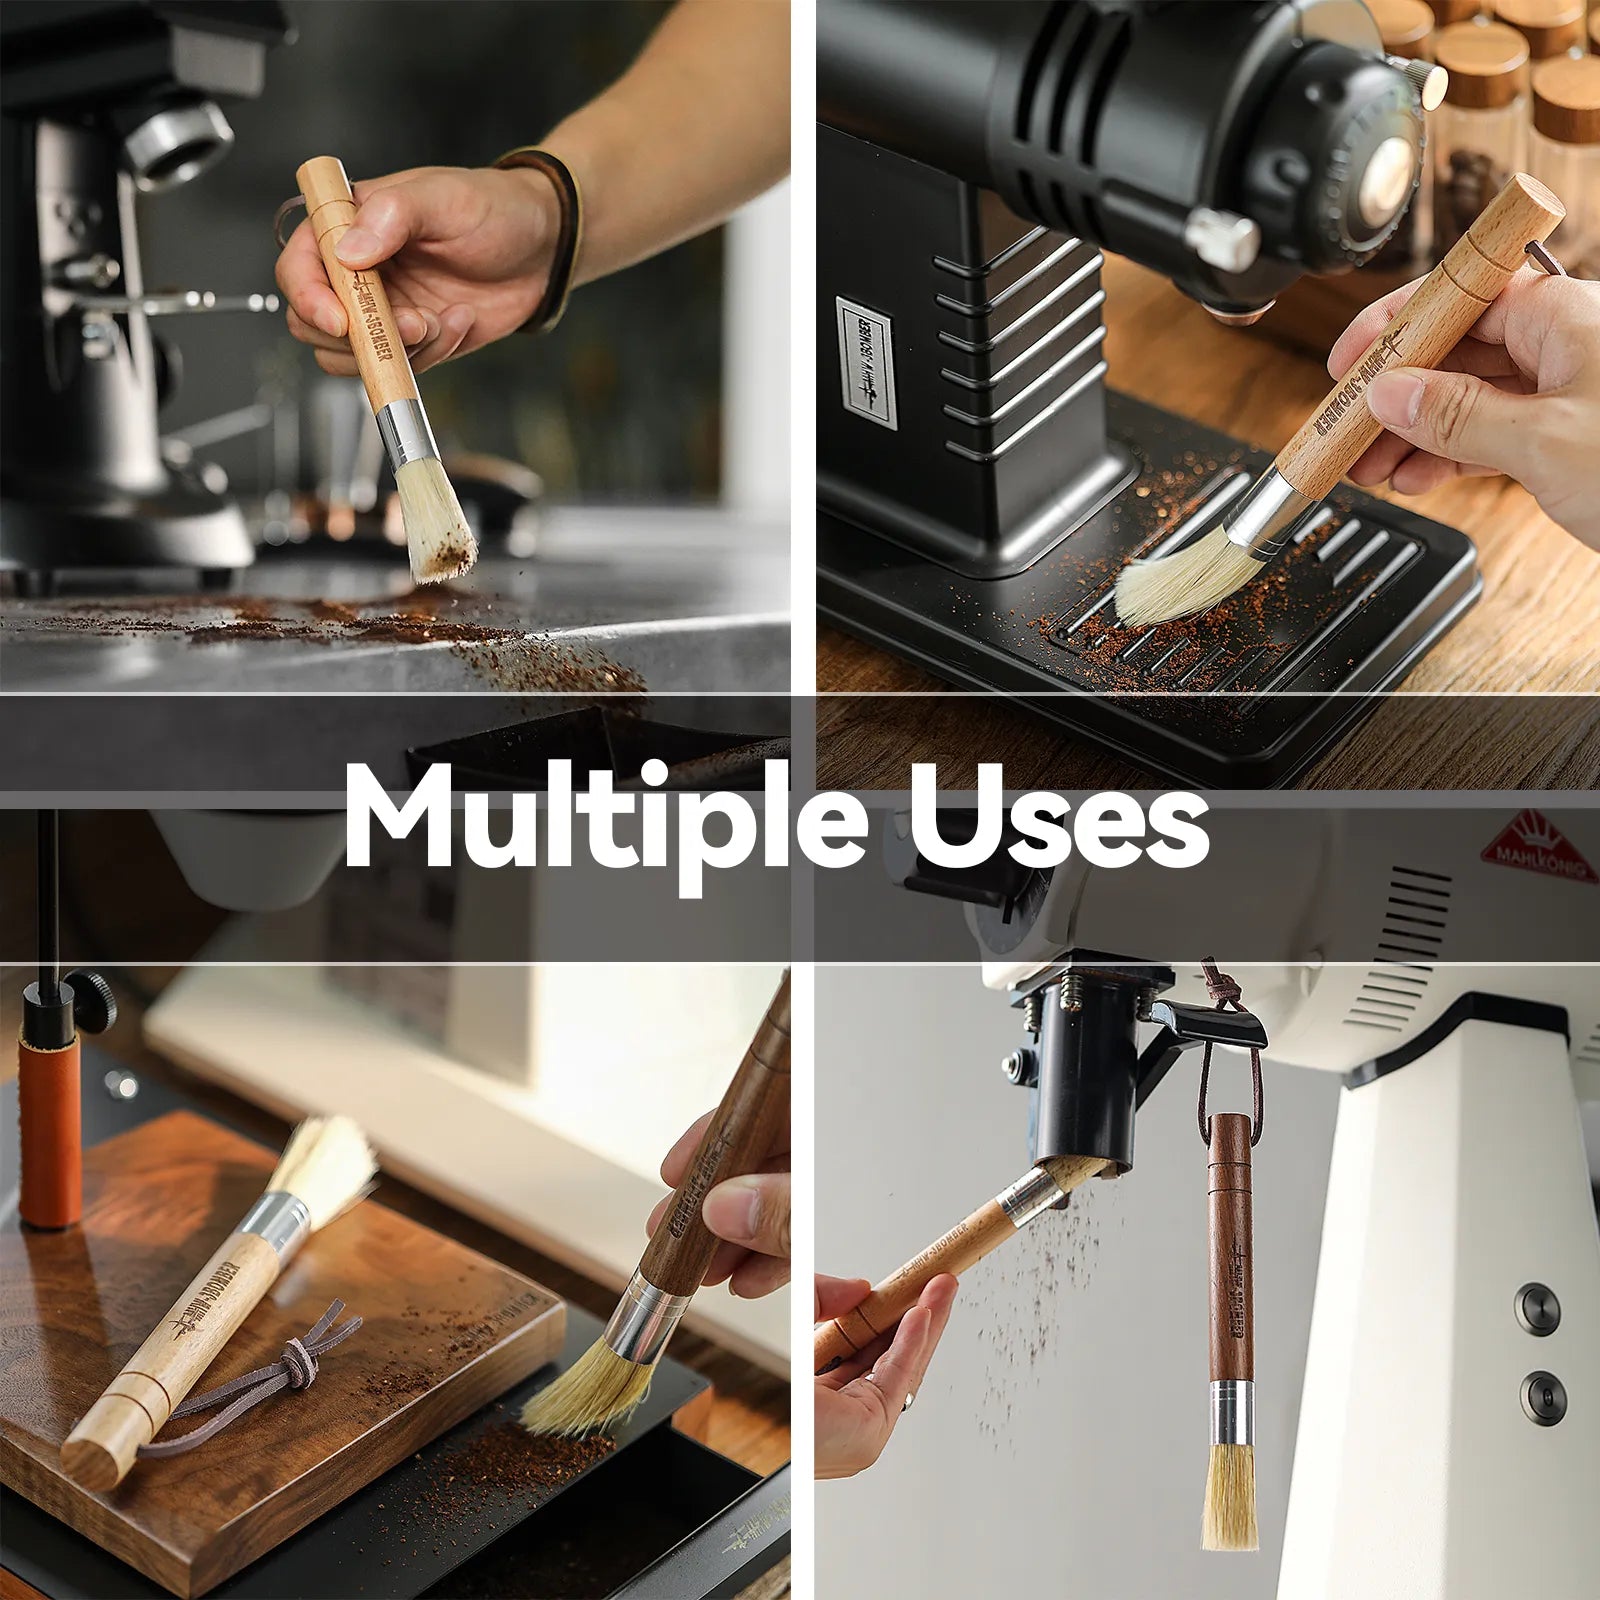 MHW-3BOMBER Coffee Grinder Cleaning Brush Dusting Espresso Brush Accessories for Home Barista Kitchen Tool Wood Handle & Natural